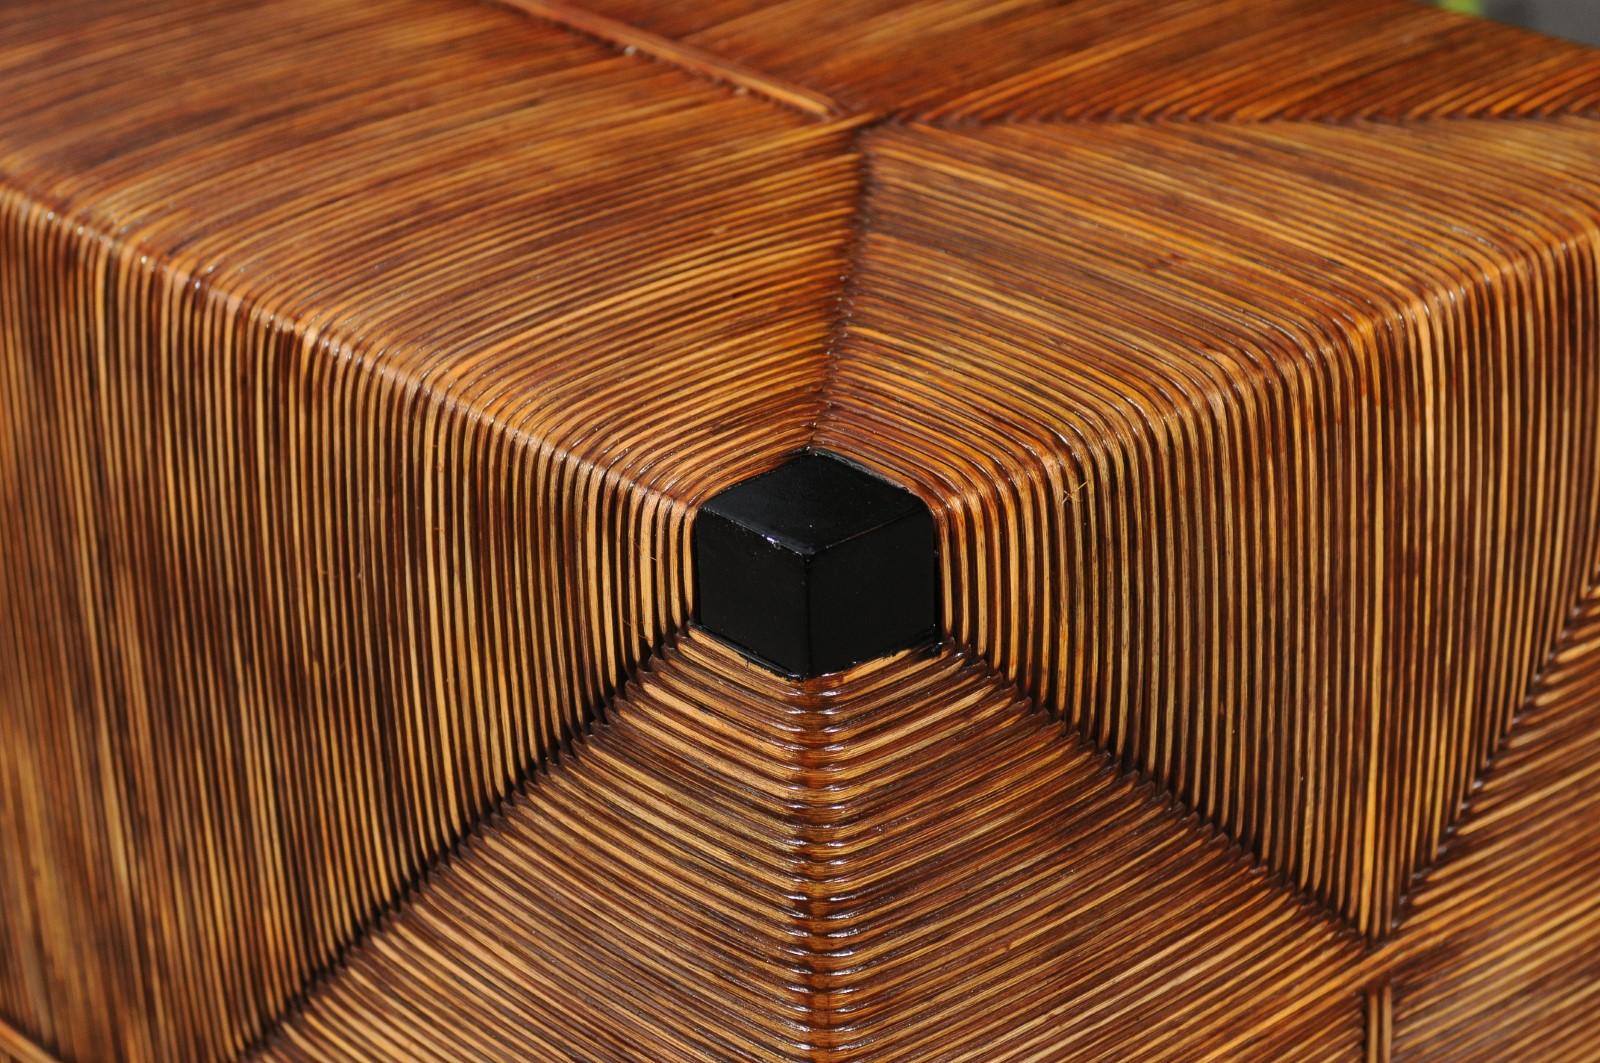 Sublime Black Lacquer Wicker Commode by John Hutton for Donghia- Pair Available For Sale 5